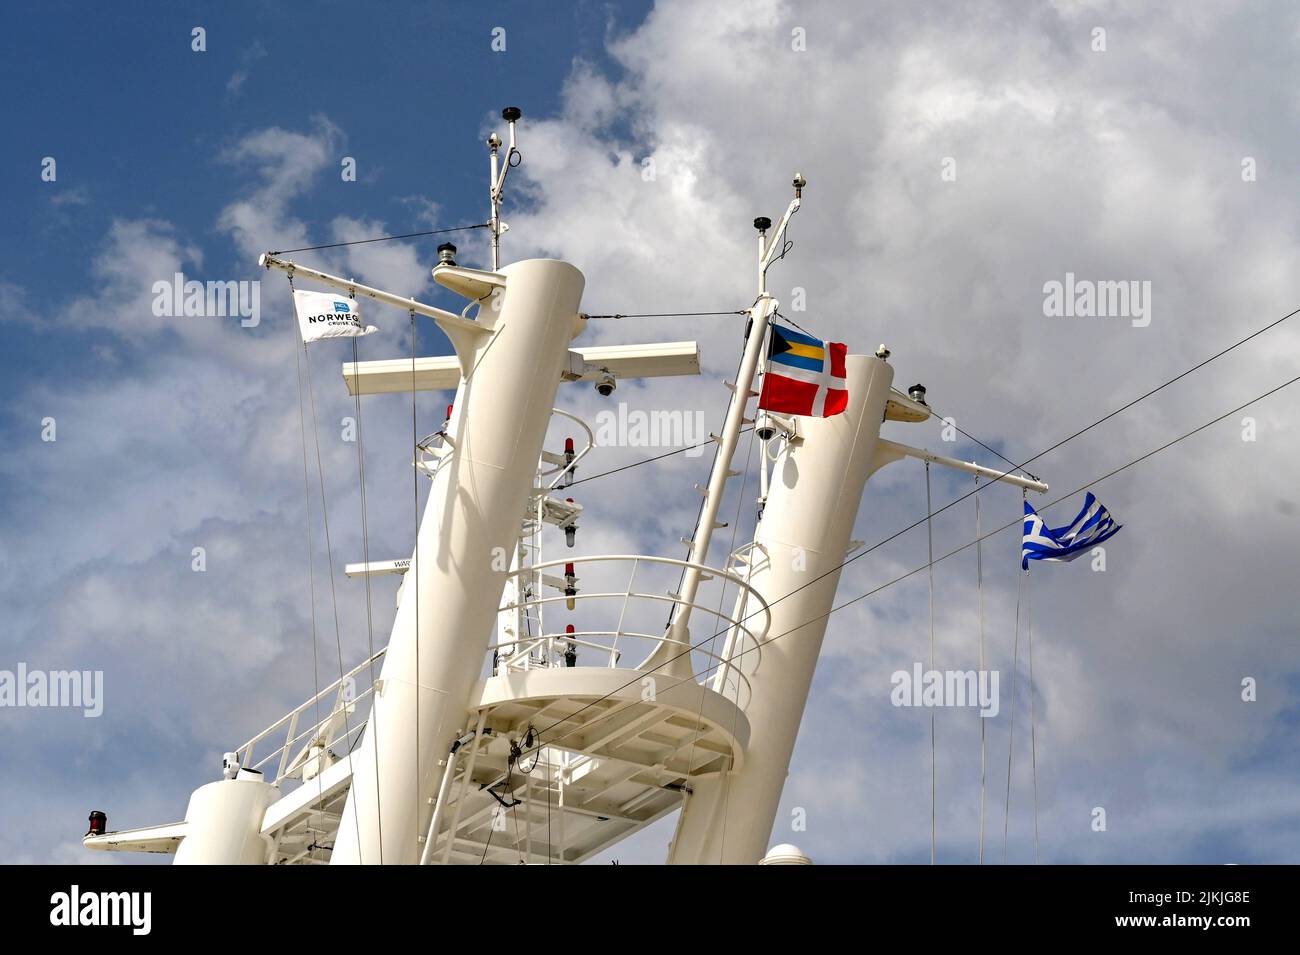 Athens, Greece - may 2022: Flags of Greece and the cruise ship operator Norwegian Cruise Line flying from the mast on a ship Stock Photo